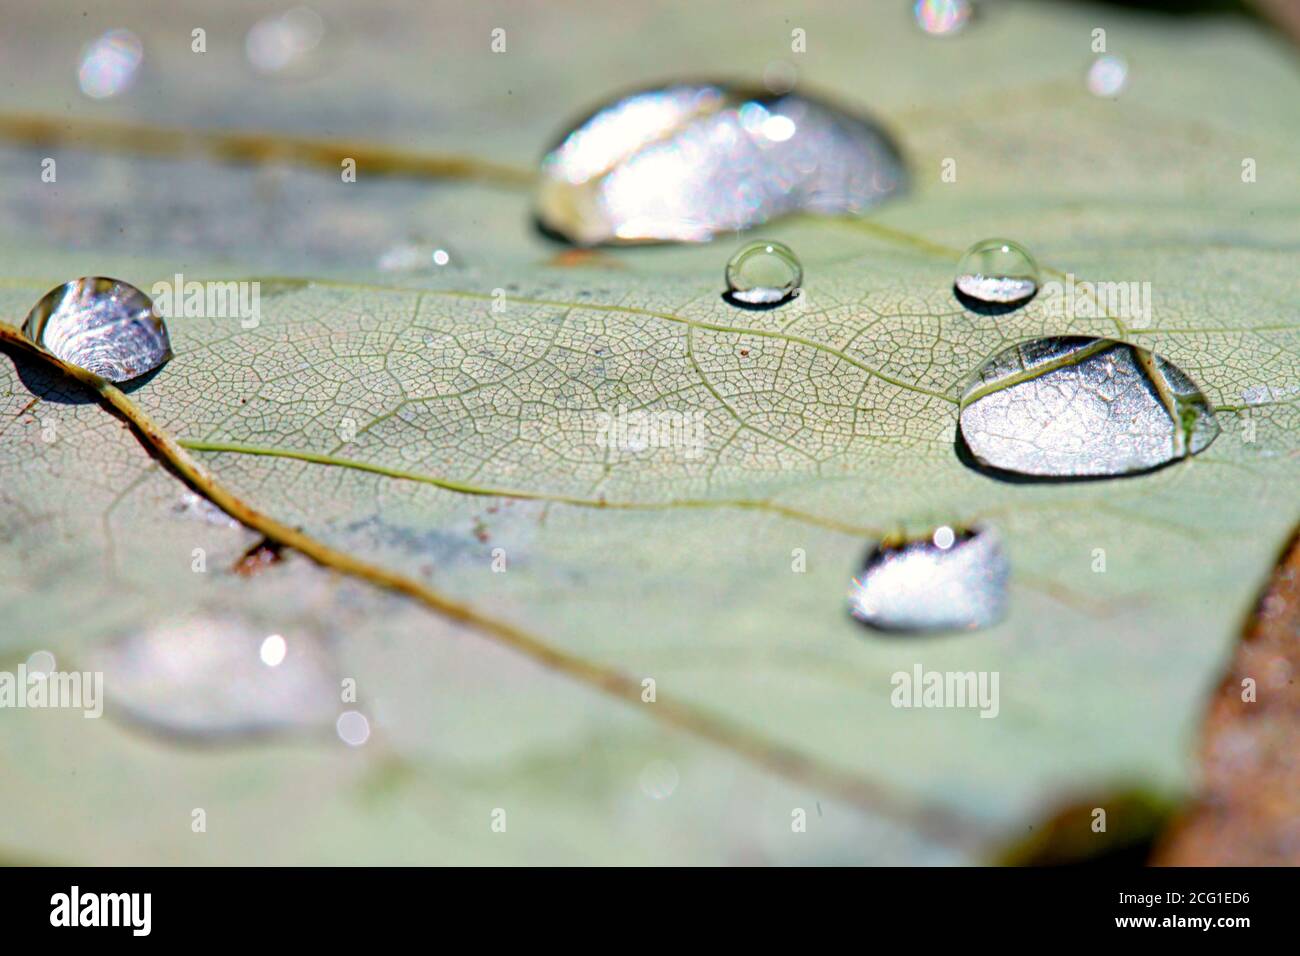 Macro water droplets on fallen leaf. High quality photo Stock Photo